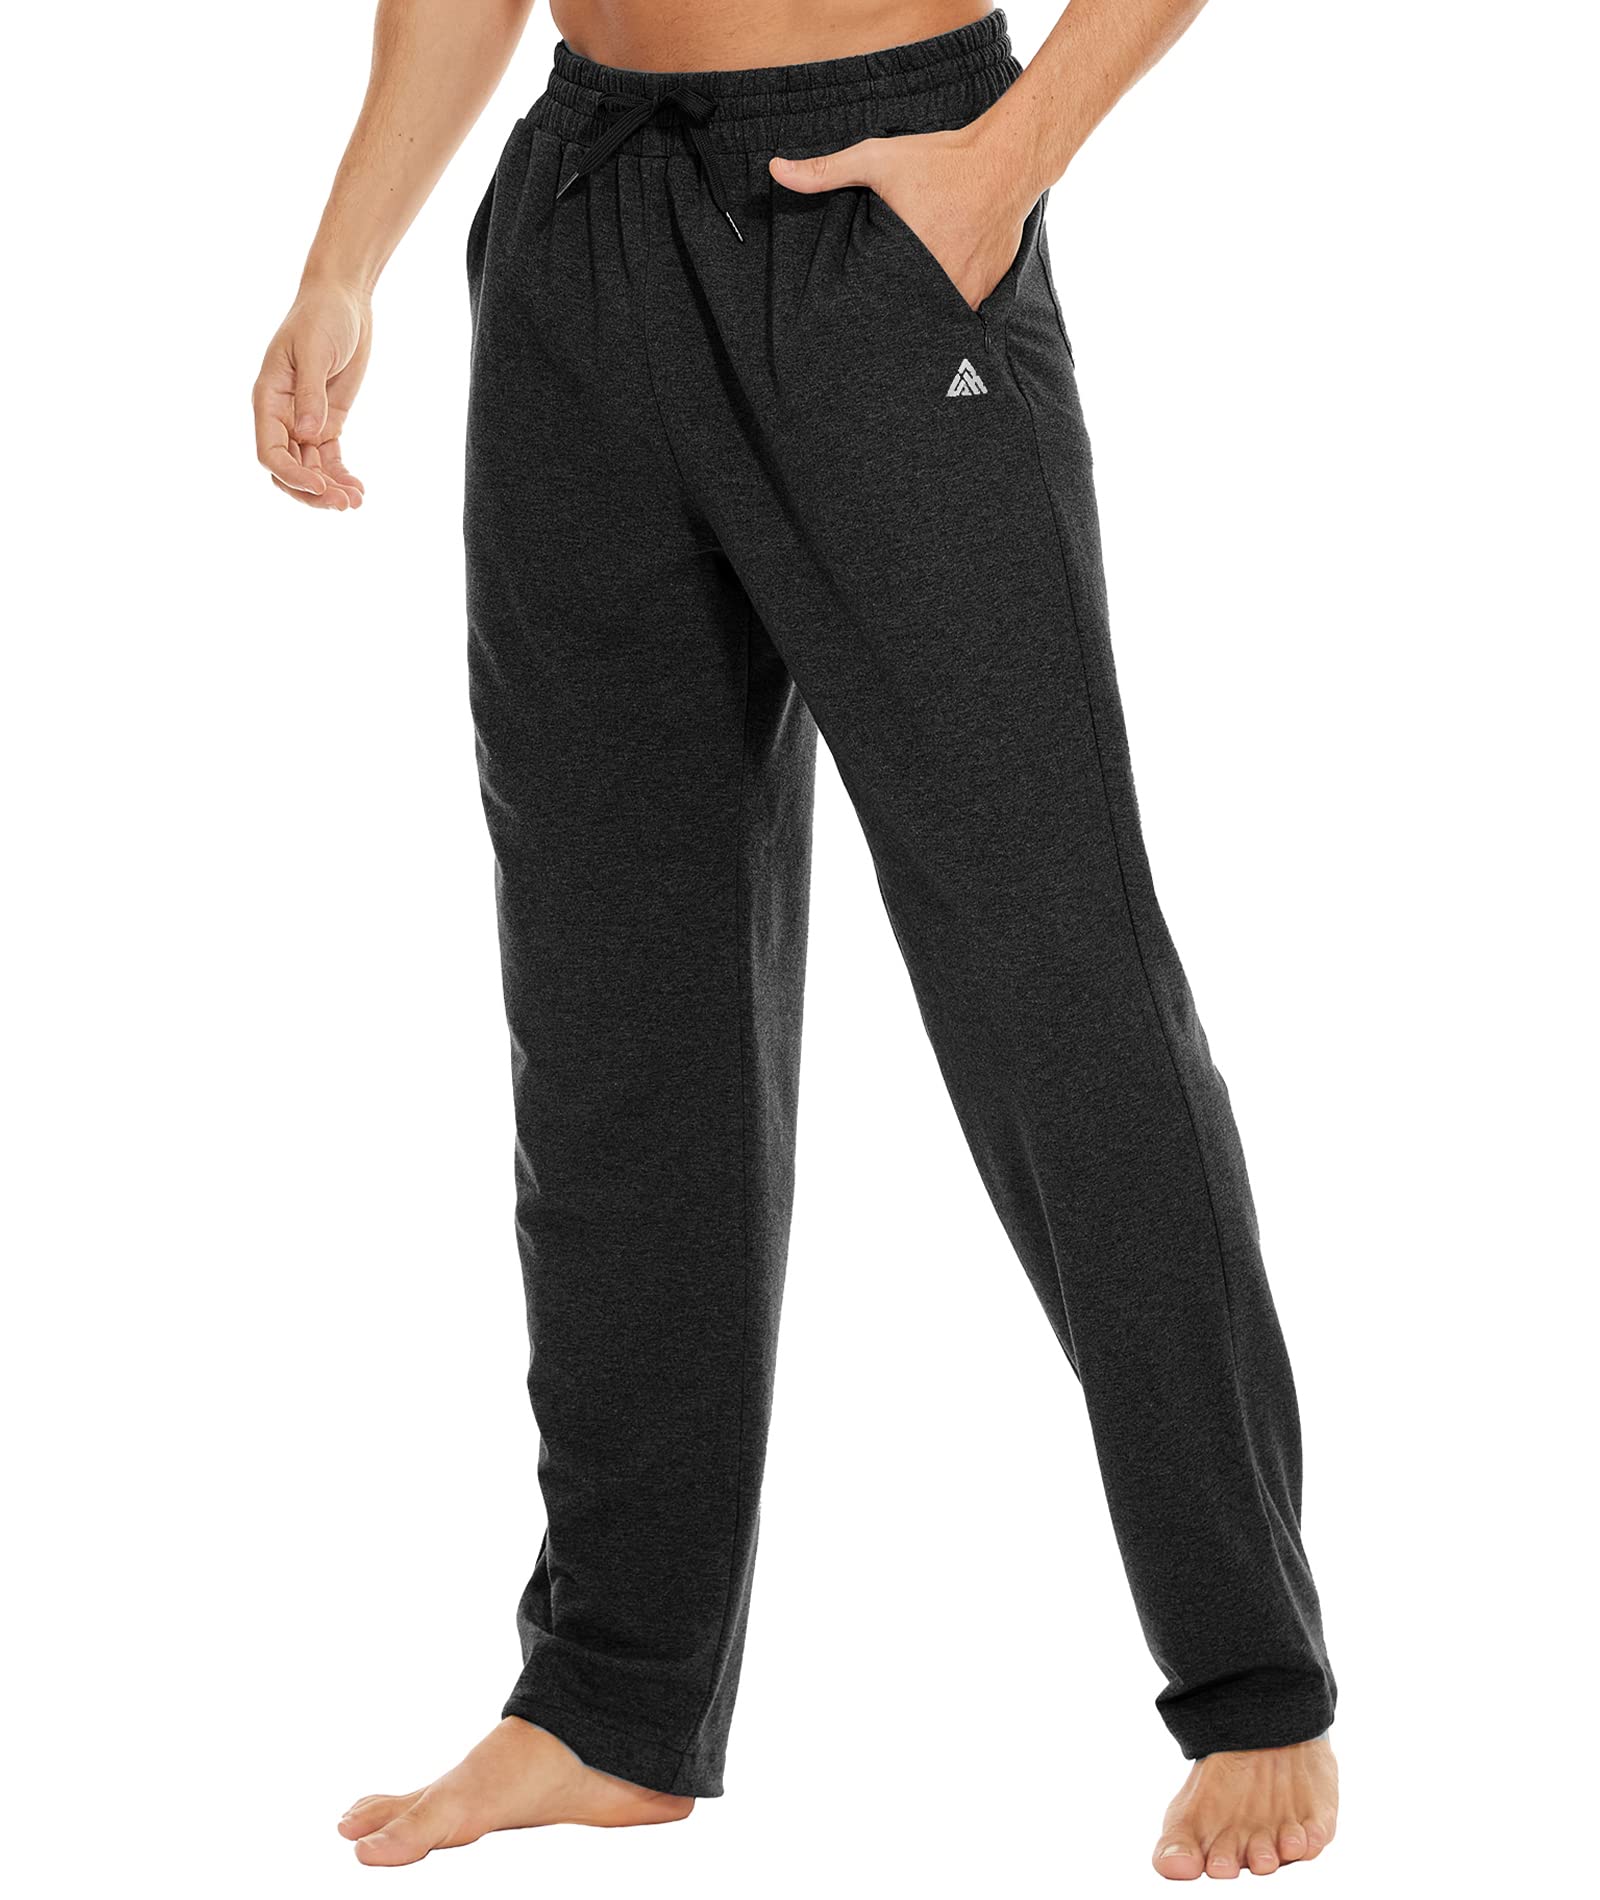 LU Quick Dry Drawstring All In Motion Joggers For Women And Men Perfect For  Sport, Yoga, Gym And Casual Wear With Elastic Waist And Pockets From  Clothes22, $14.87